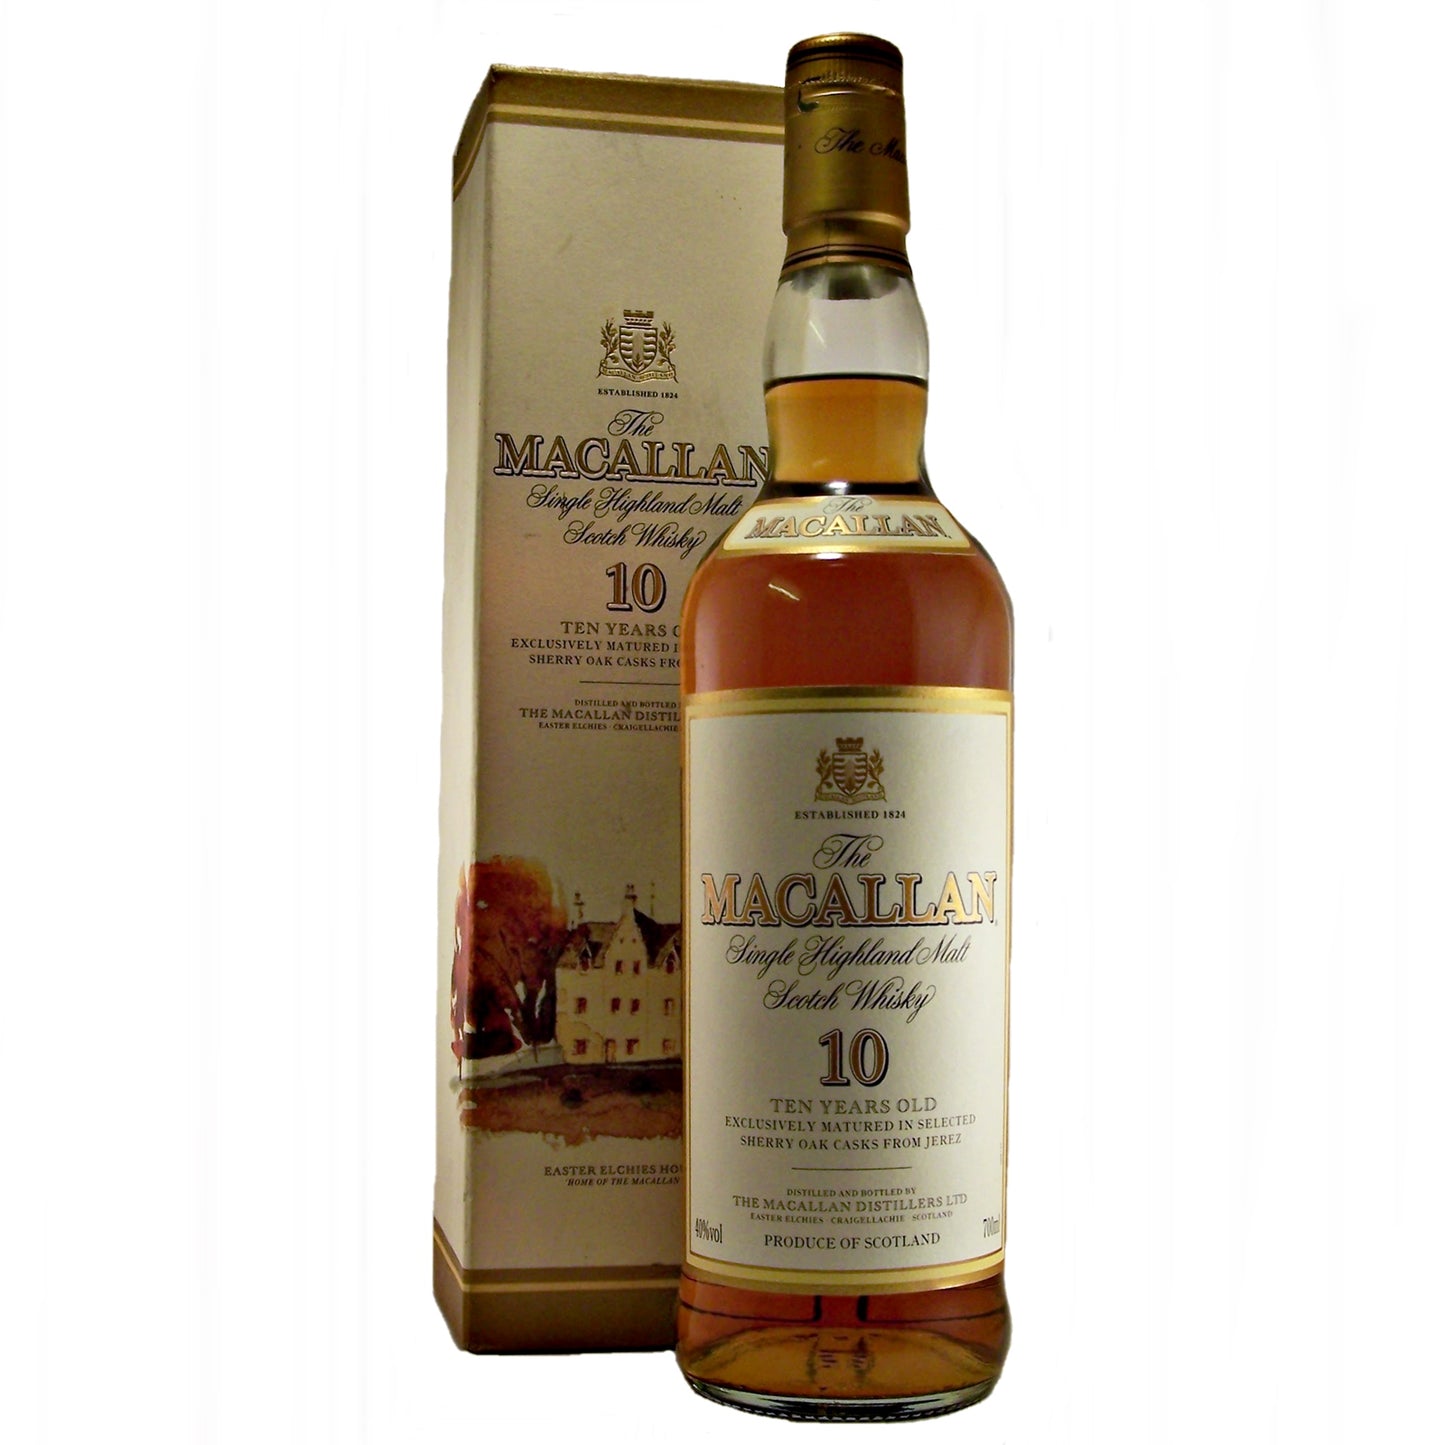 Macallan 10 year old exclusively matured in Sherry Oak Casks